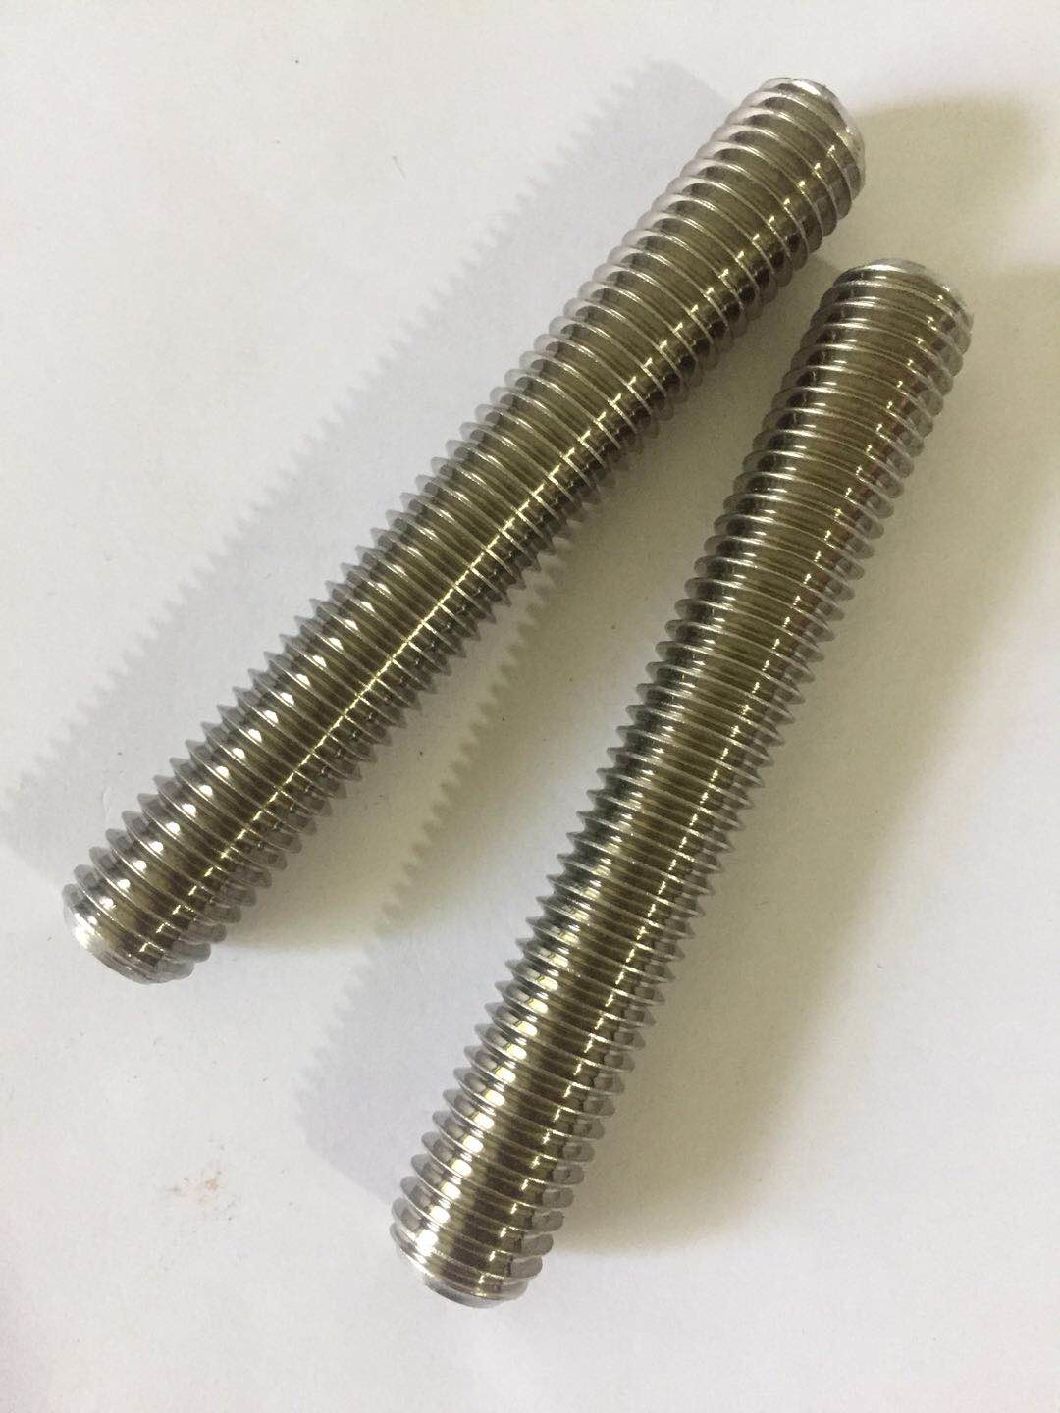 Inconel Studs, Inconel 625, Uns N06625, 2.4856 Studs Bolt